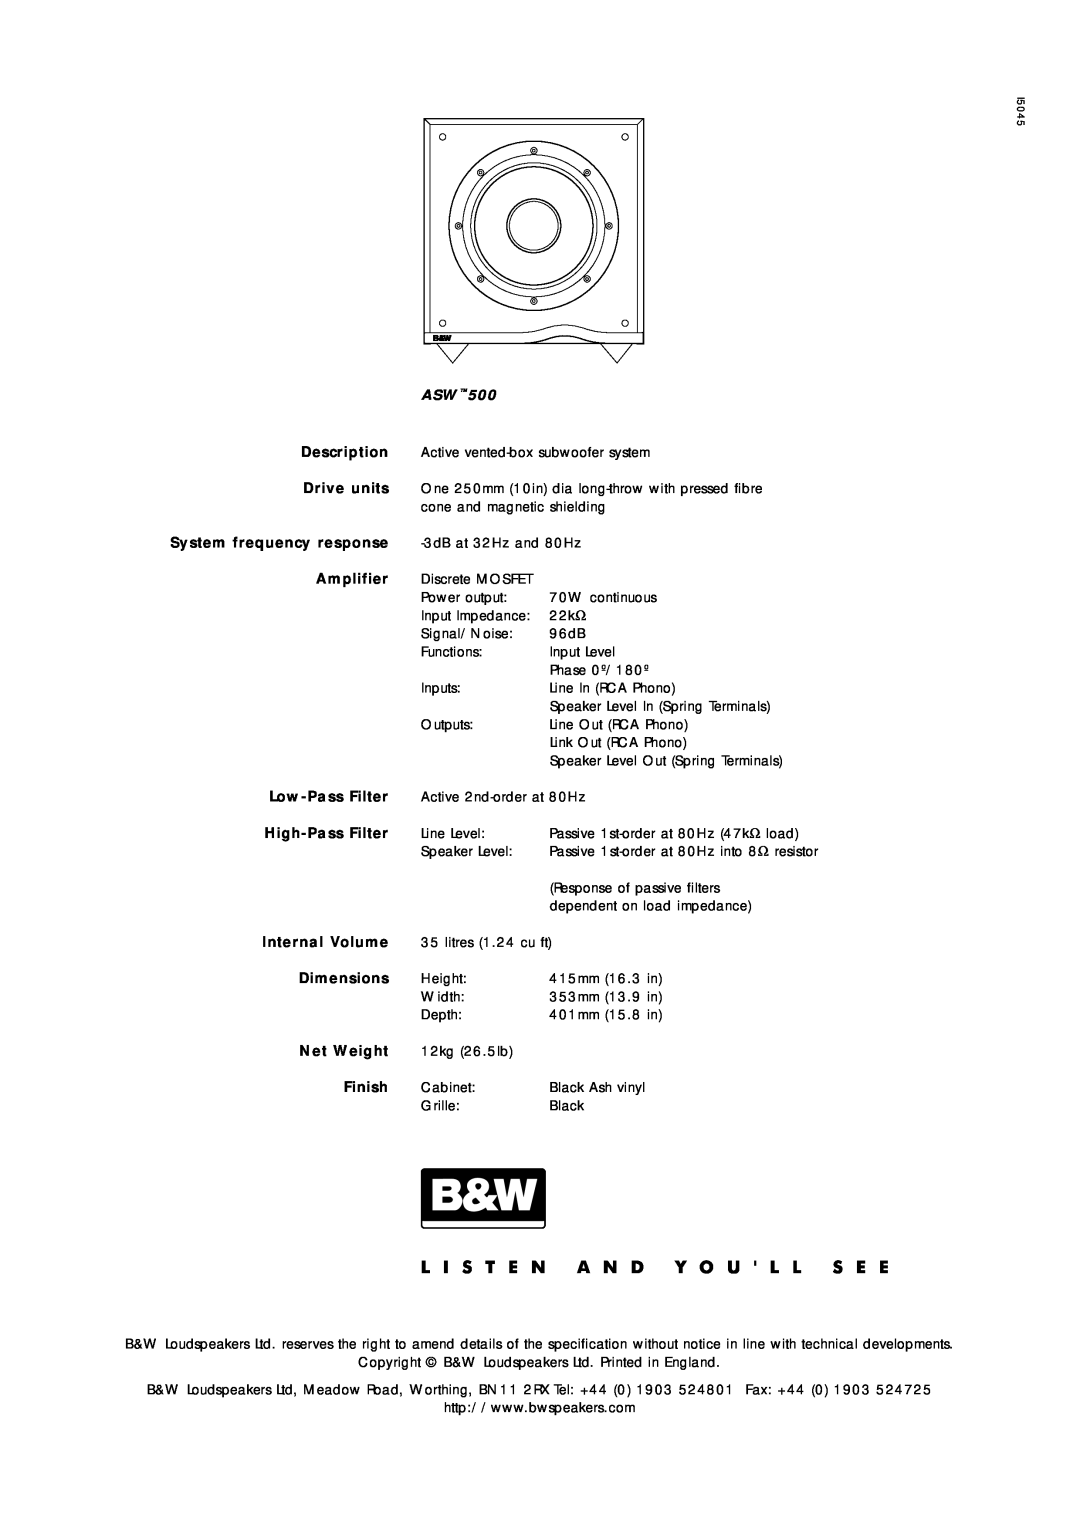 Bowers & Wilkins ASW500 owner manual Description 